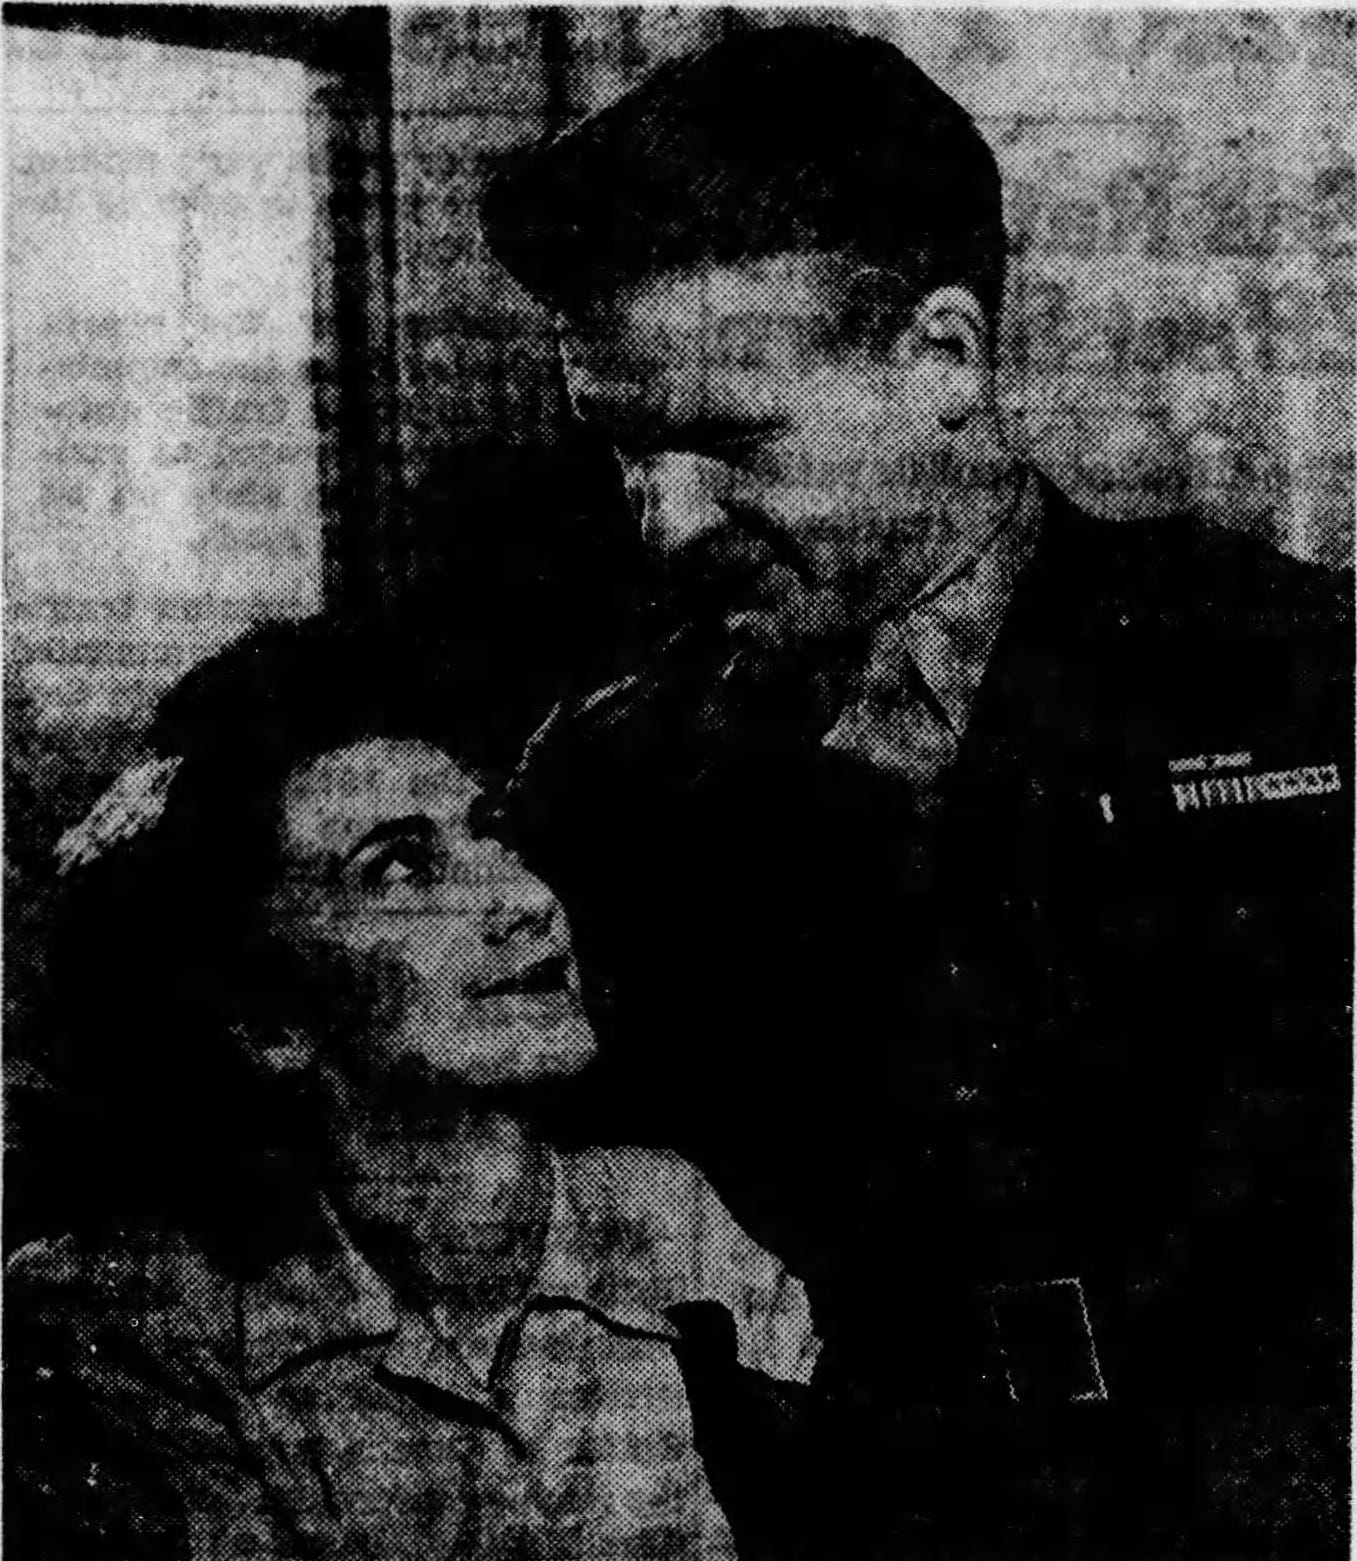 Cpl. Harold Keller, right, took a furlough in 1944 to marry Ruby O'Halloran. Keller returned to combat at Iwo Jima, where he would  be photographed in one of the most well-known photos of World War II. But his identity in the photo wouldn't be discovered for 74 years.